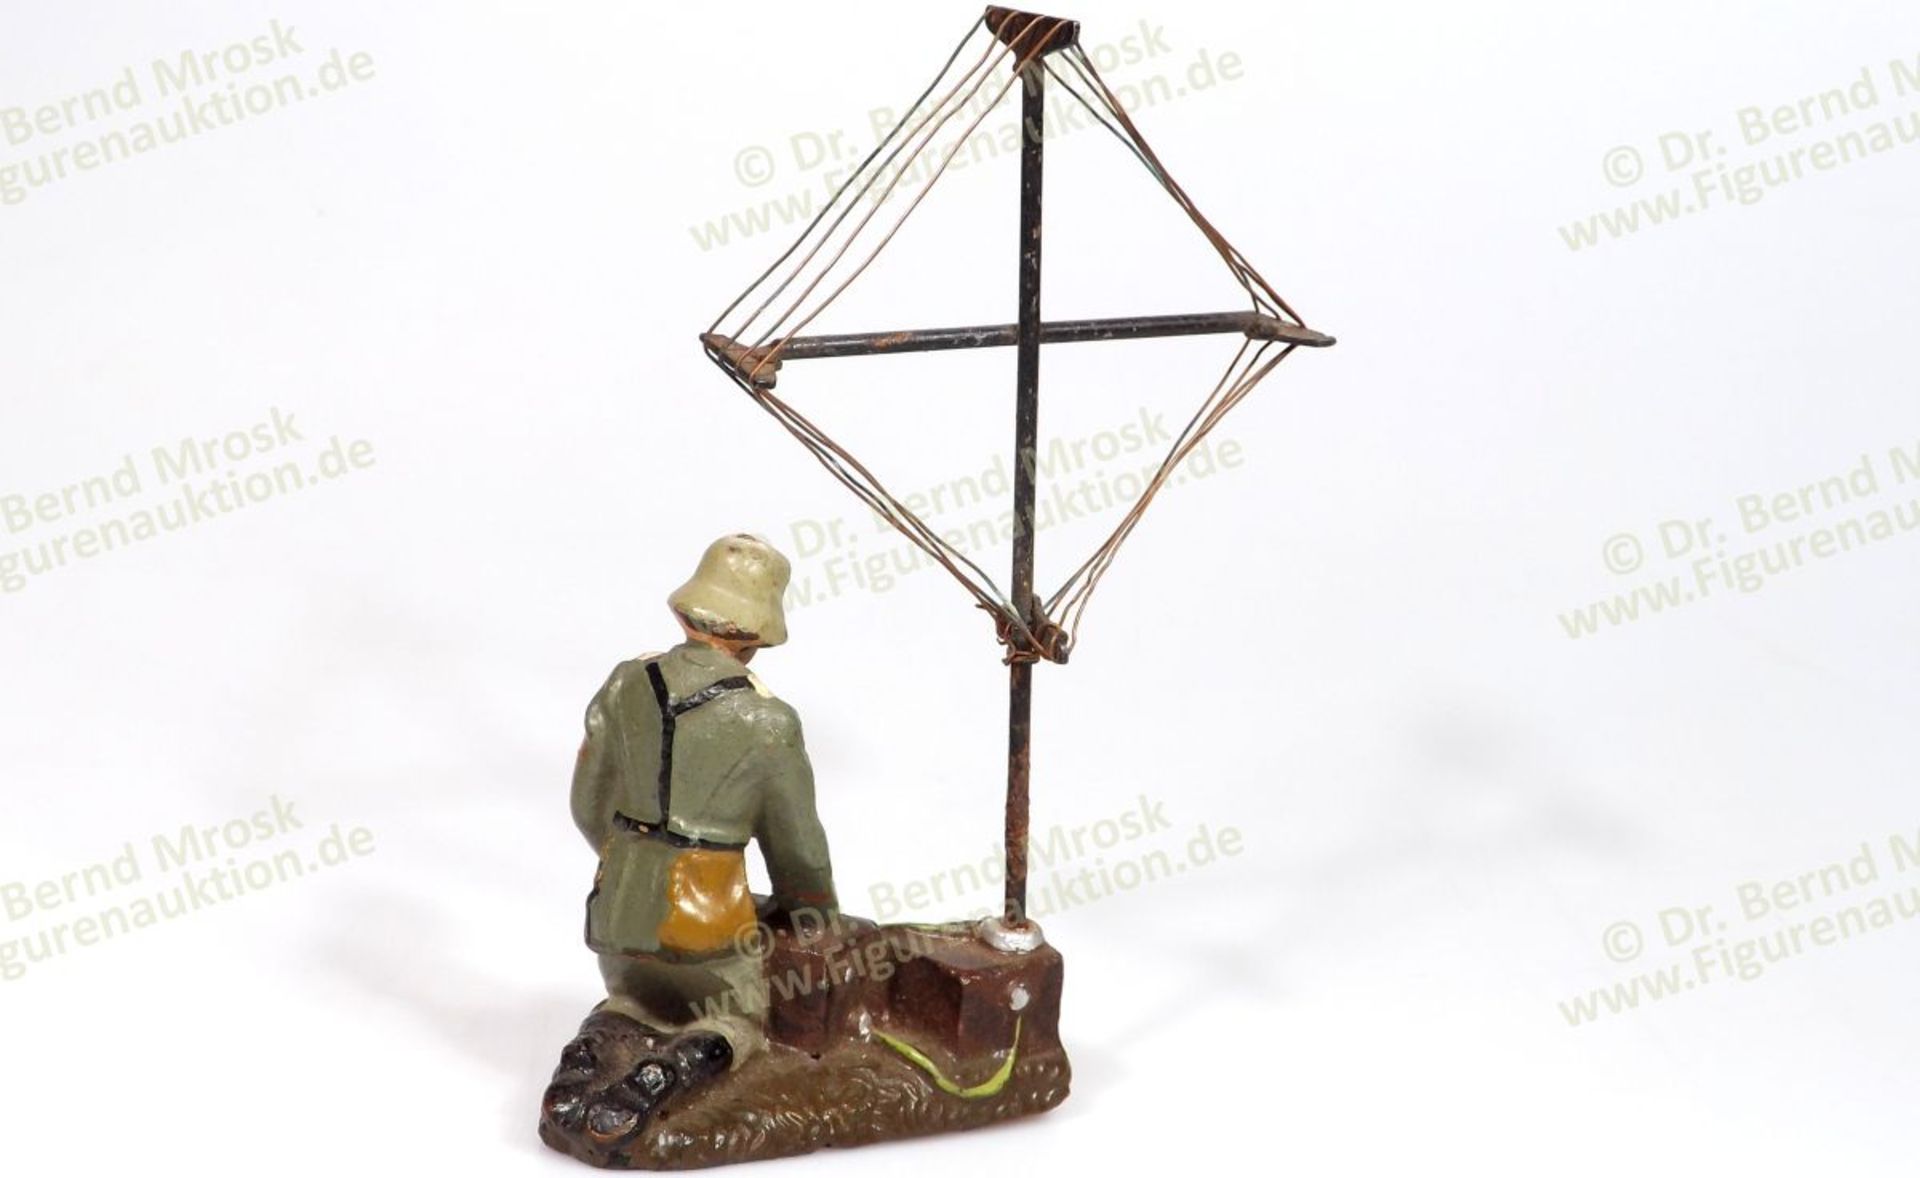 German military, Lineol, composition figures, 7-7,5 cm size, made in Germany about 1938 - Bild 2 aus 2